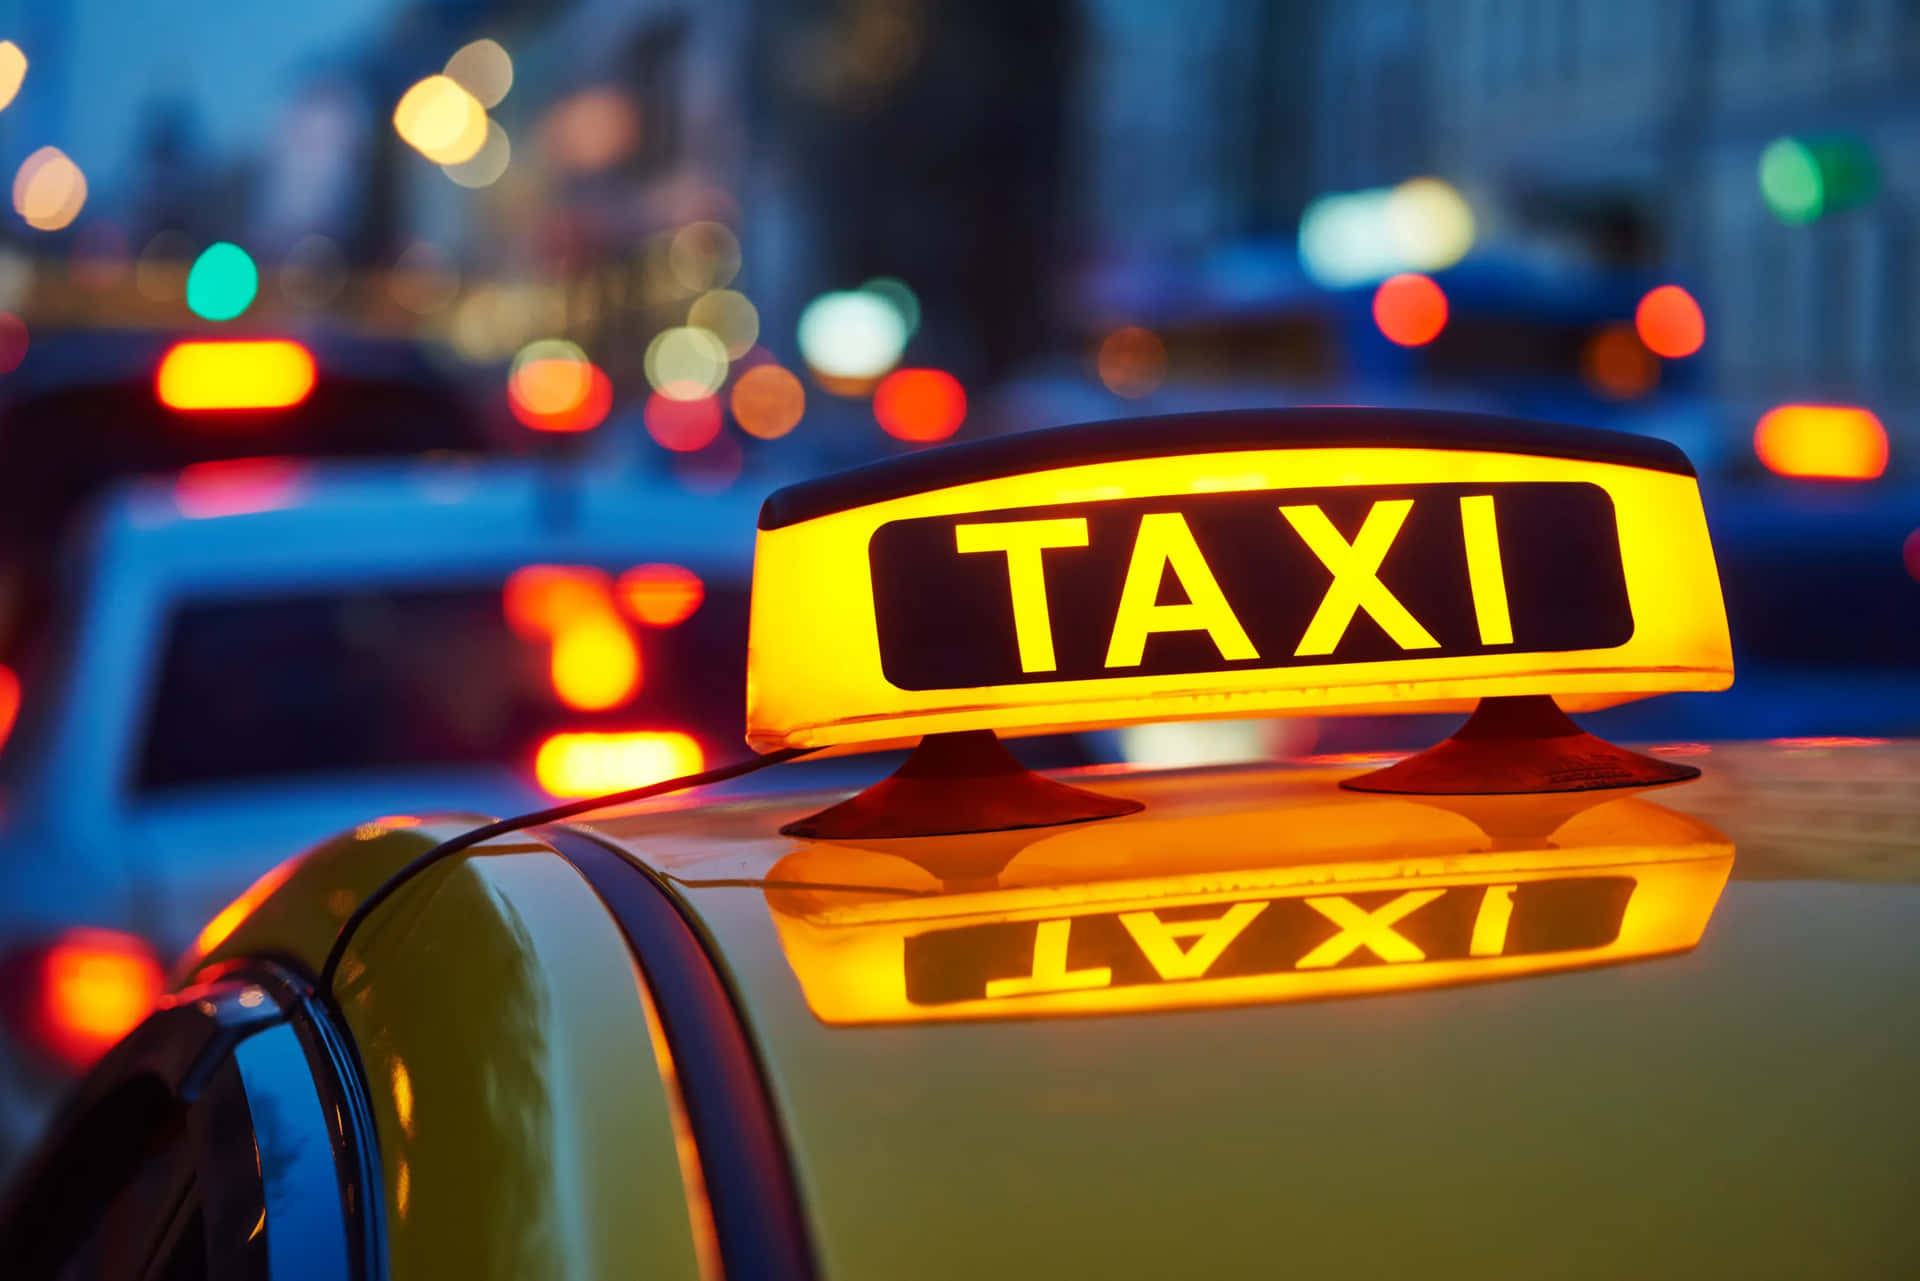 Get where you need to go with a convenient and reliable taxi ride.